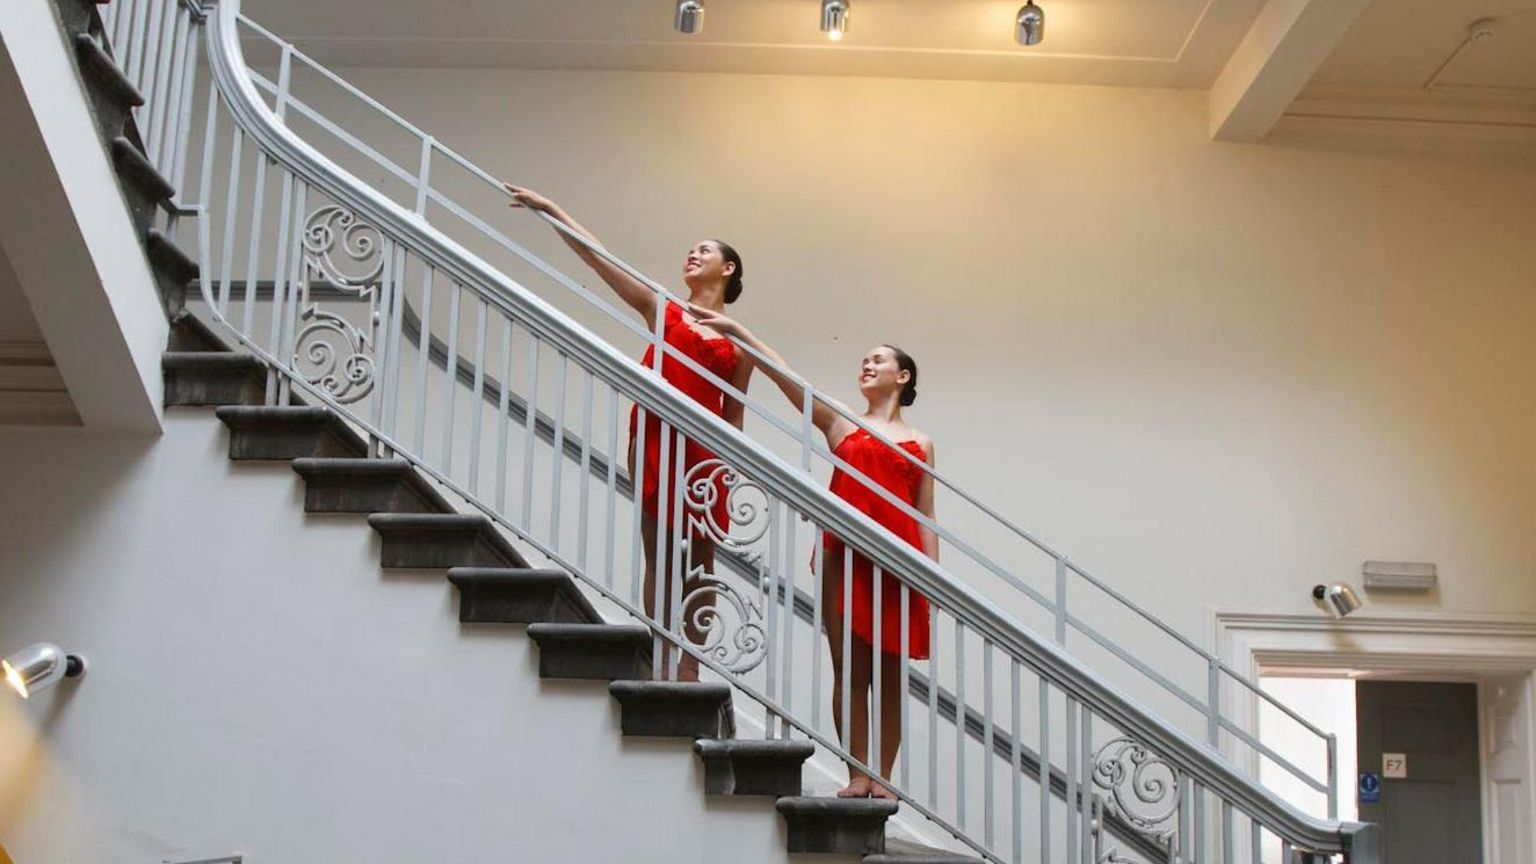 Two ballet dancers on a stair case